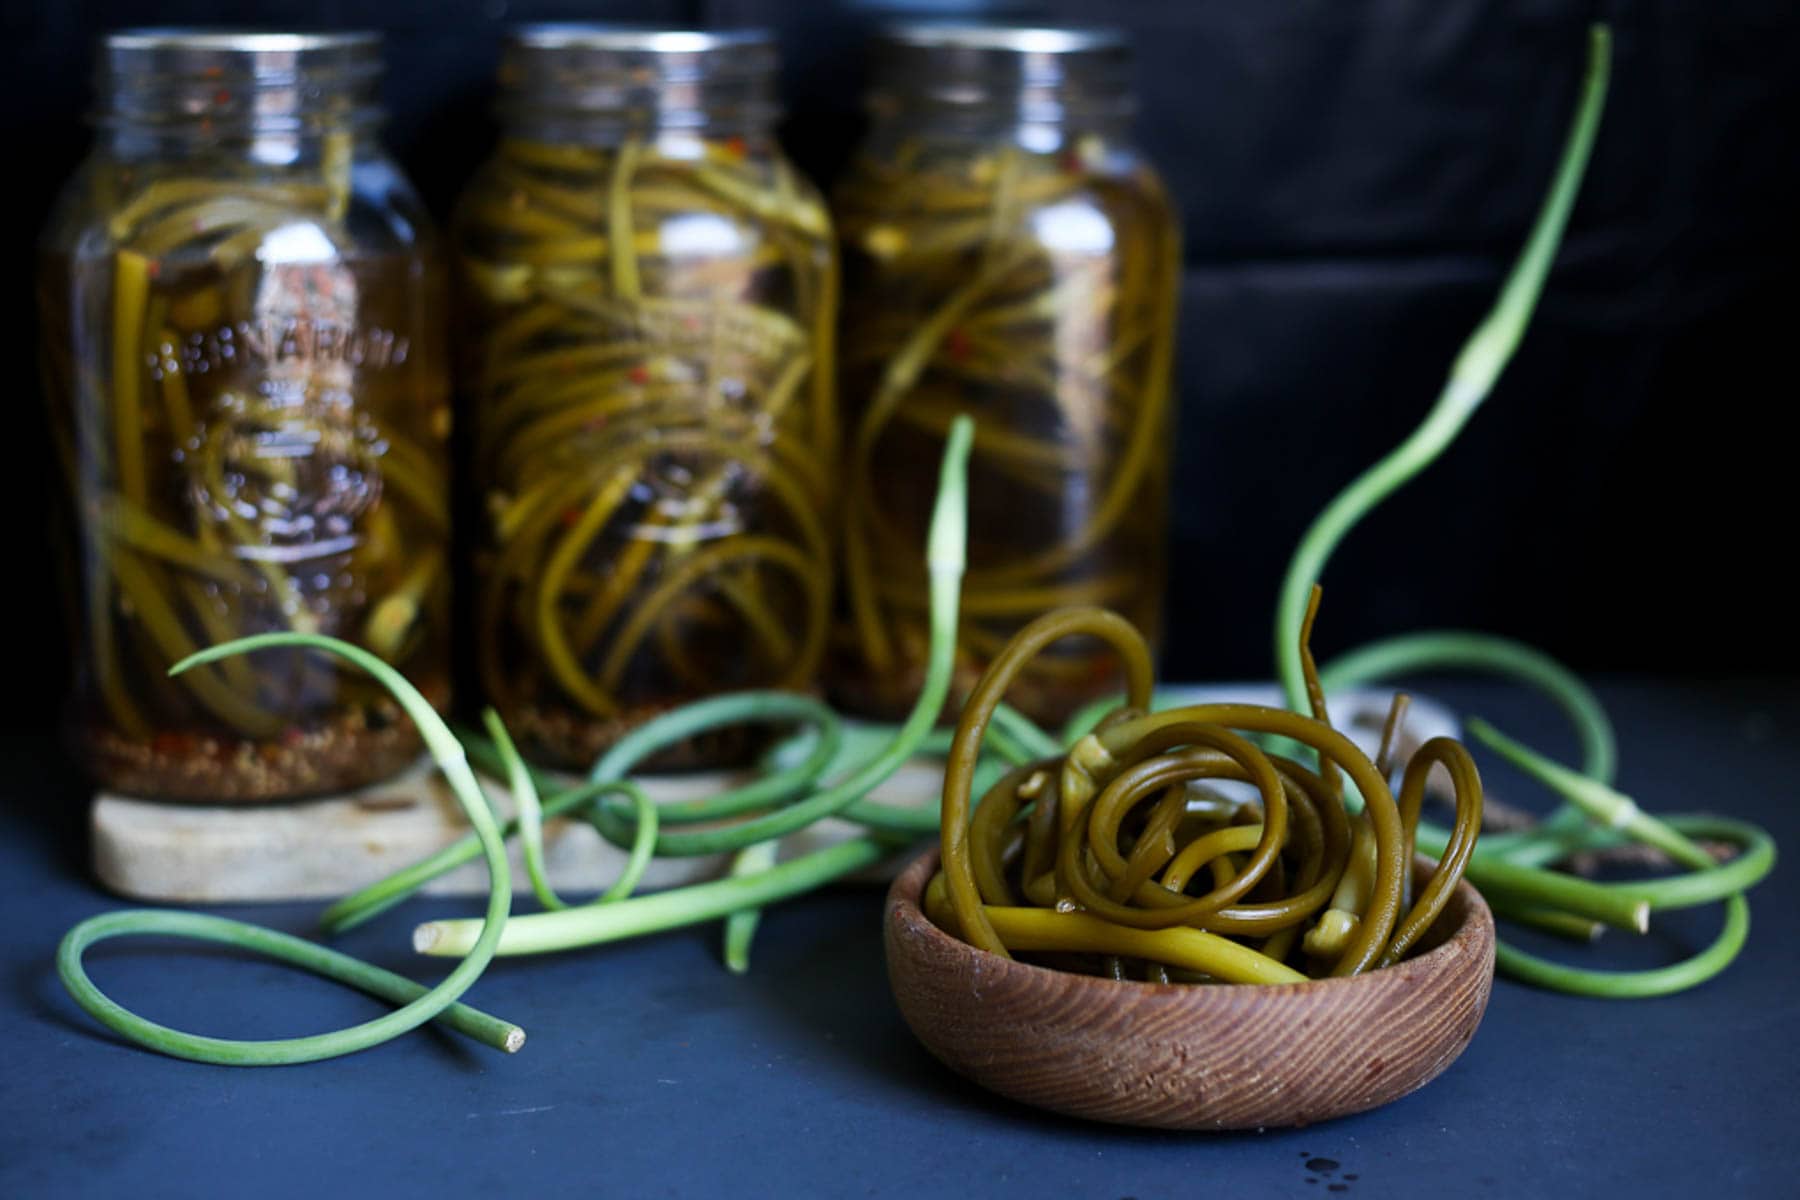 Two jars of garlic scape pickles and a wooden bowl.